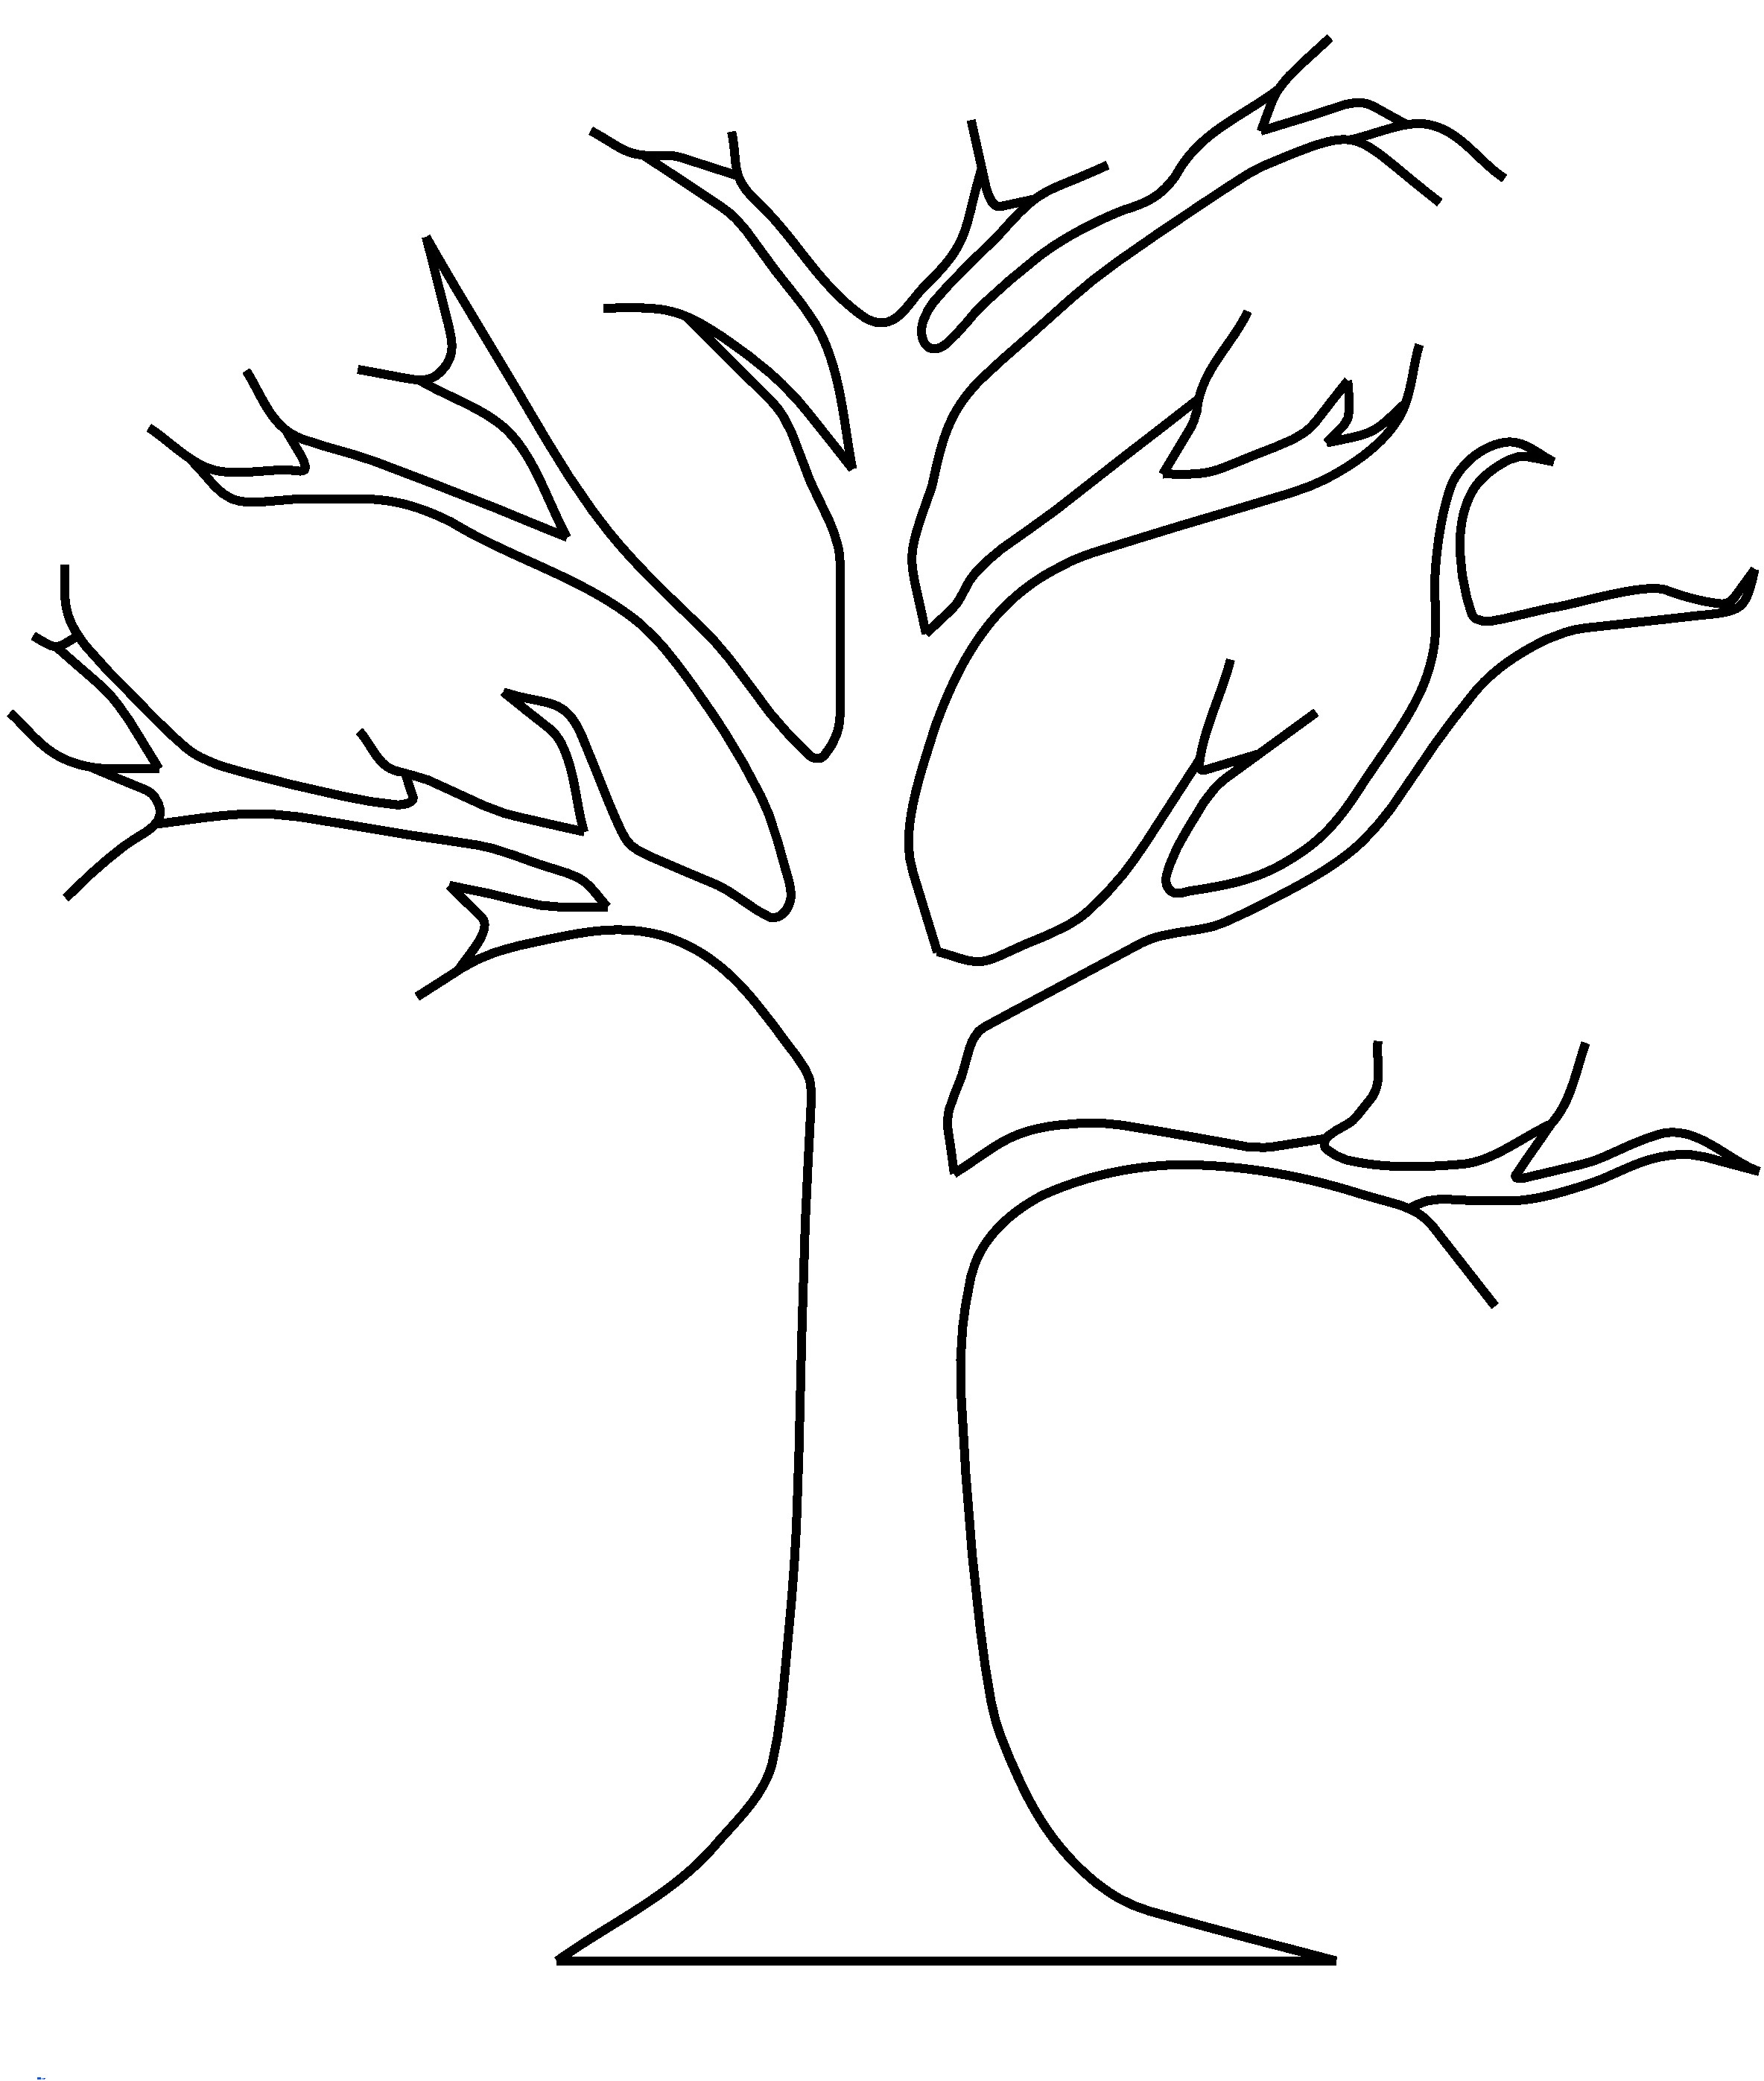 Free Leafless Tree Outline Printable, Download Free Clip Art, Free - Free Printable Tree Template